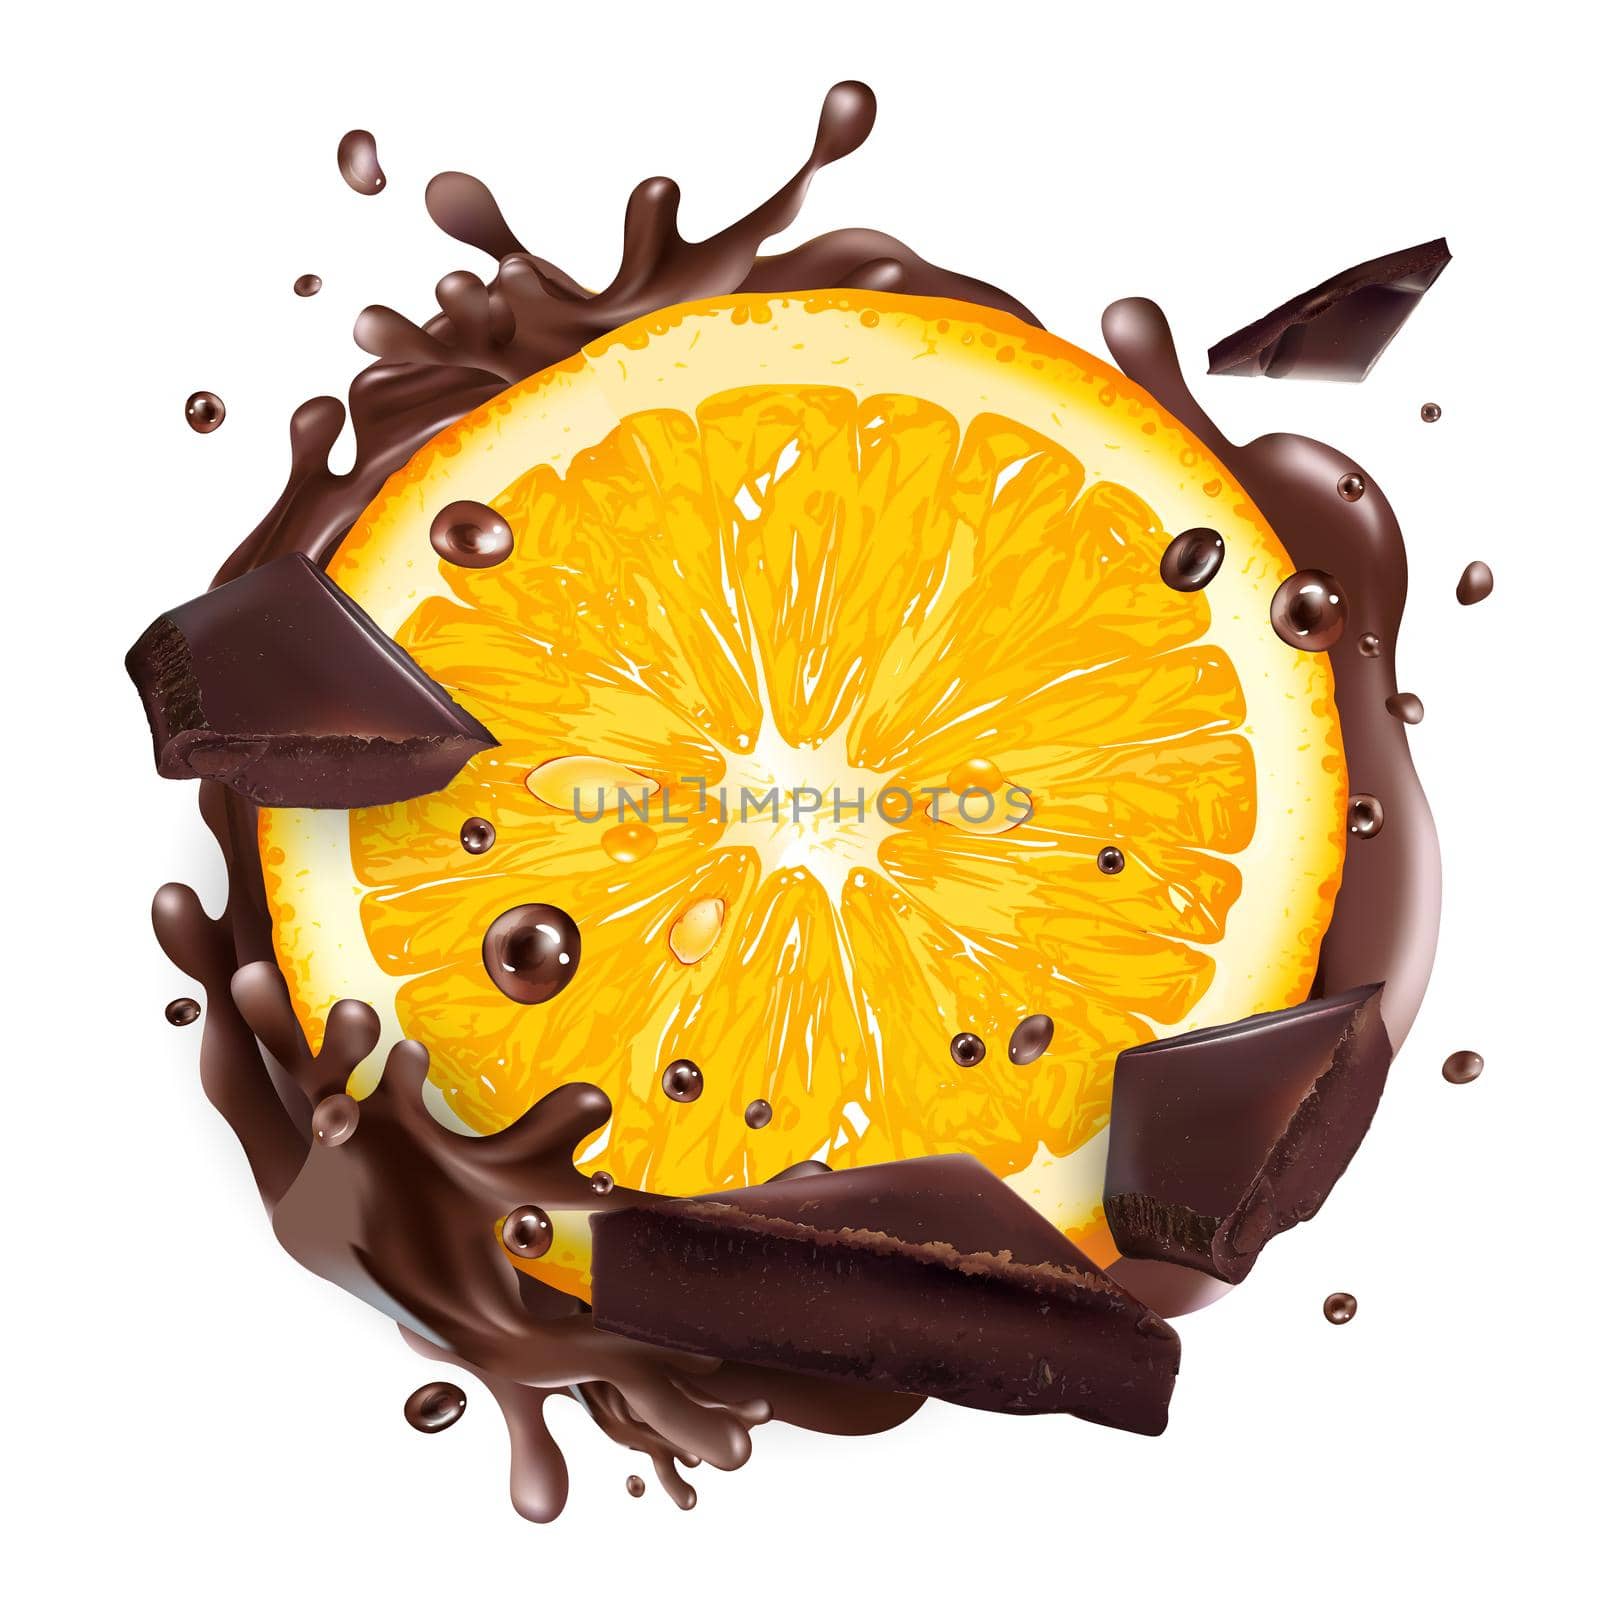 A slice of orange with pieces of chocolate in a chocolate splash on a white background. Realistic style illustration.